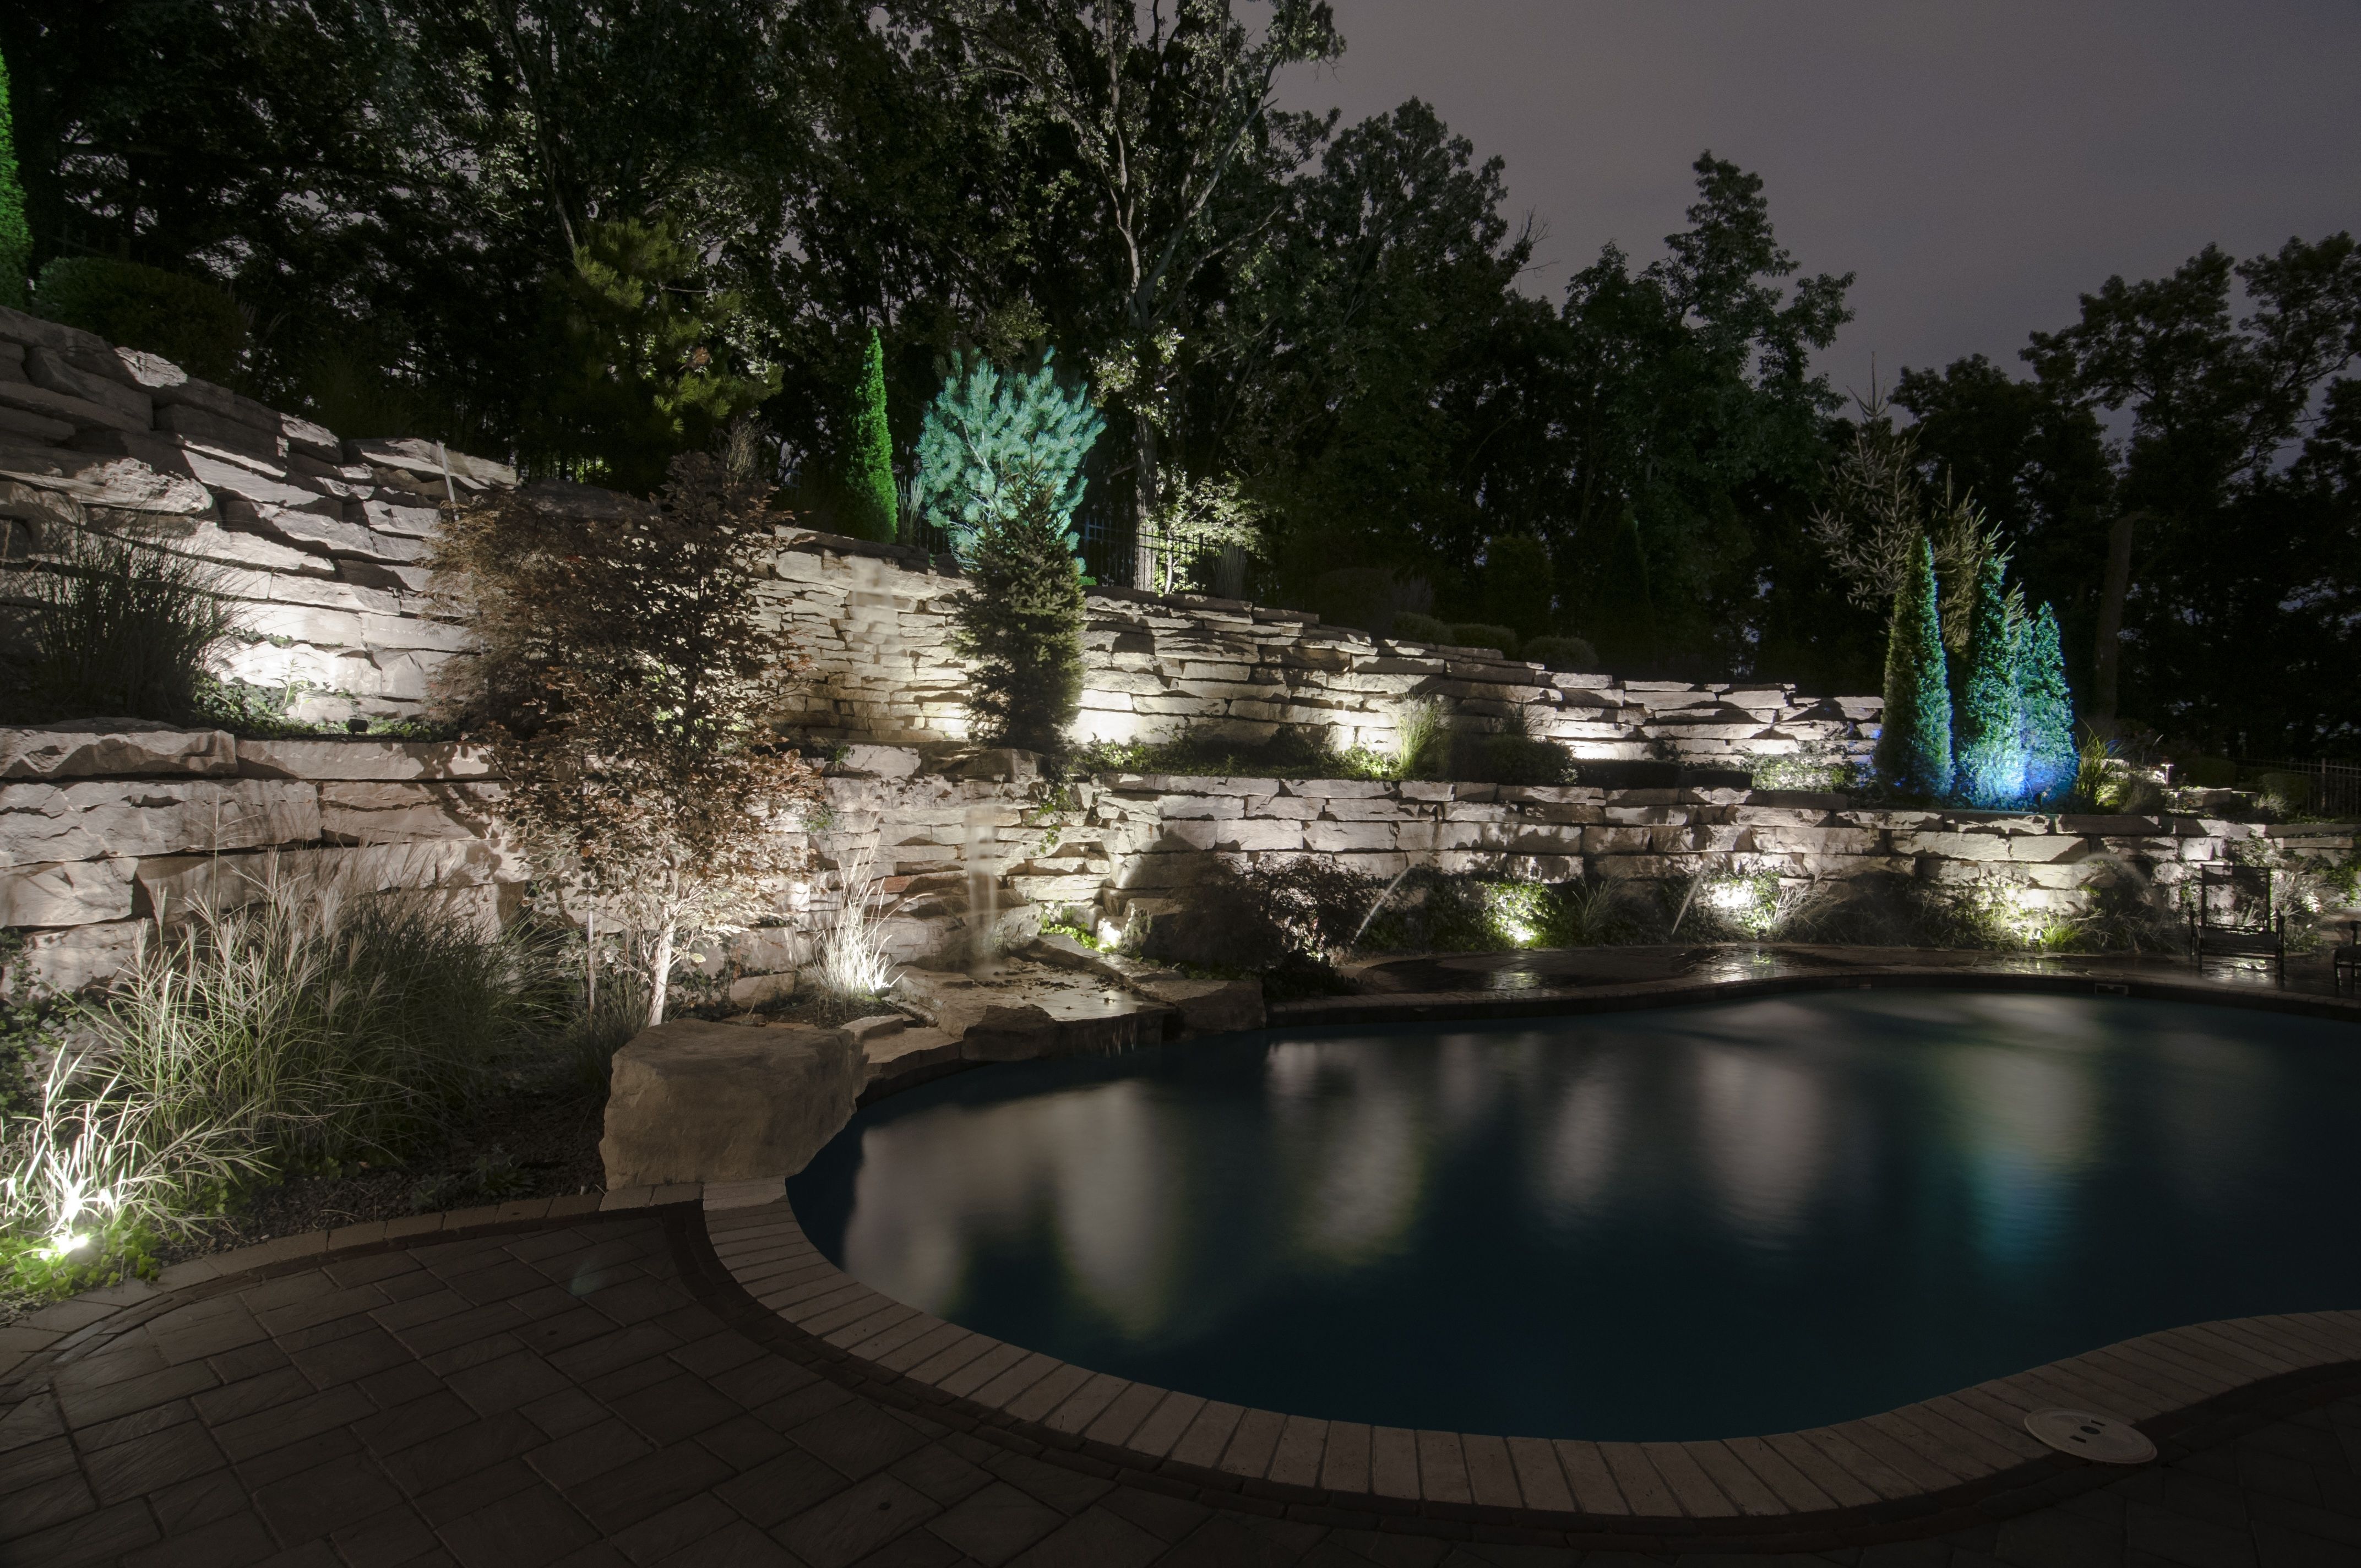 Orland Park Retaining Wall Lighting – Outdoor Lighting In Chicago In Outdoor Retaining Wall Lighting (View 5 of 15)